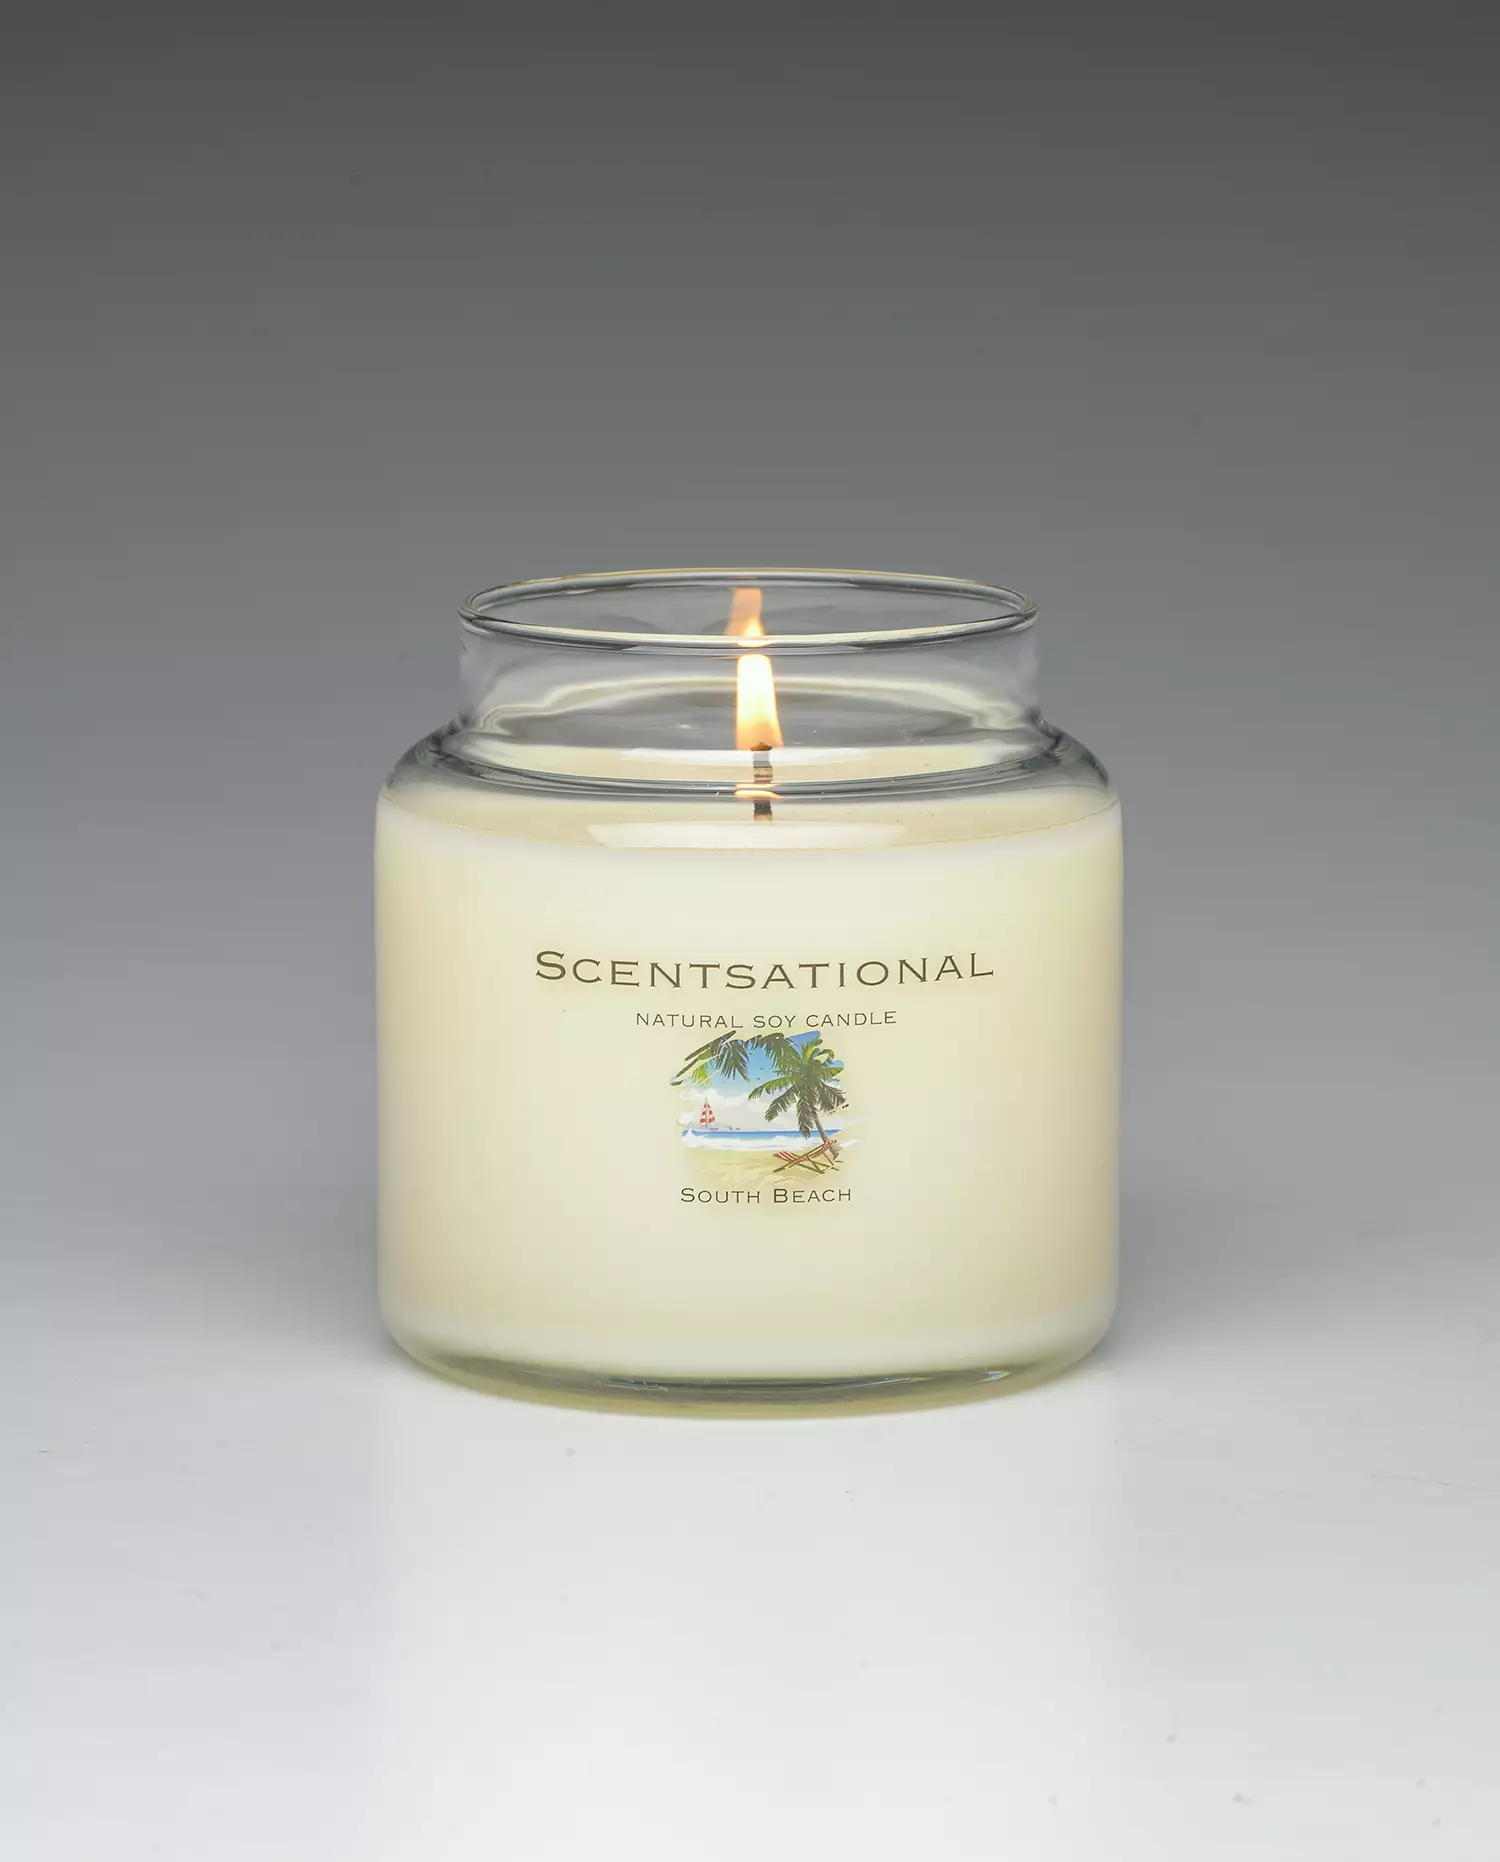 South Beach 19oz Scented Candle burning